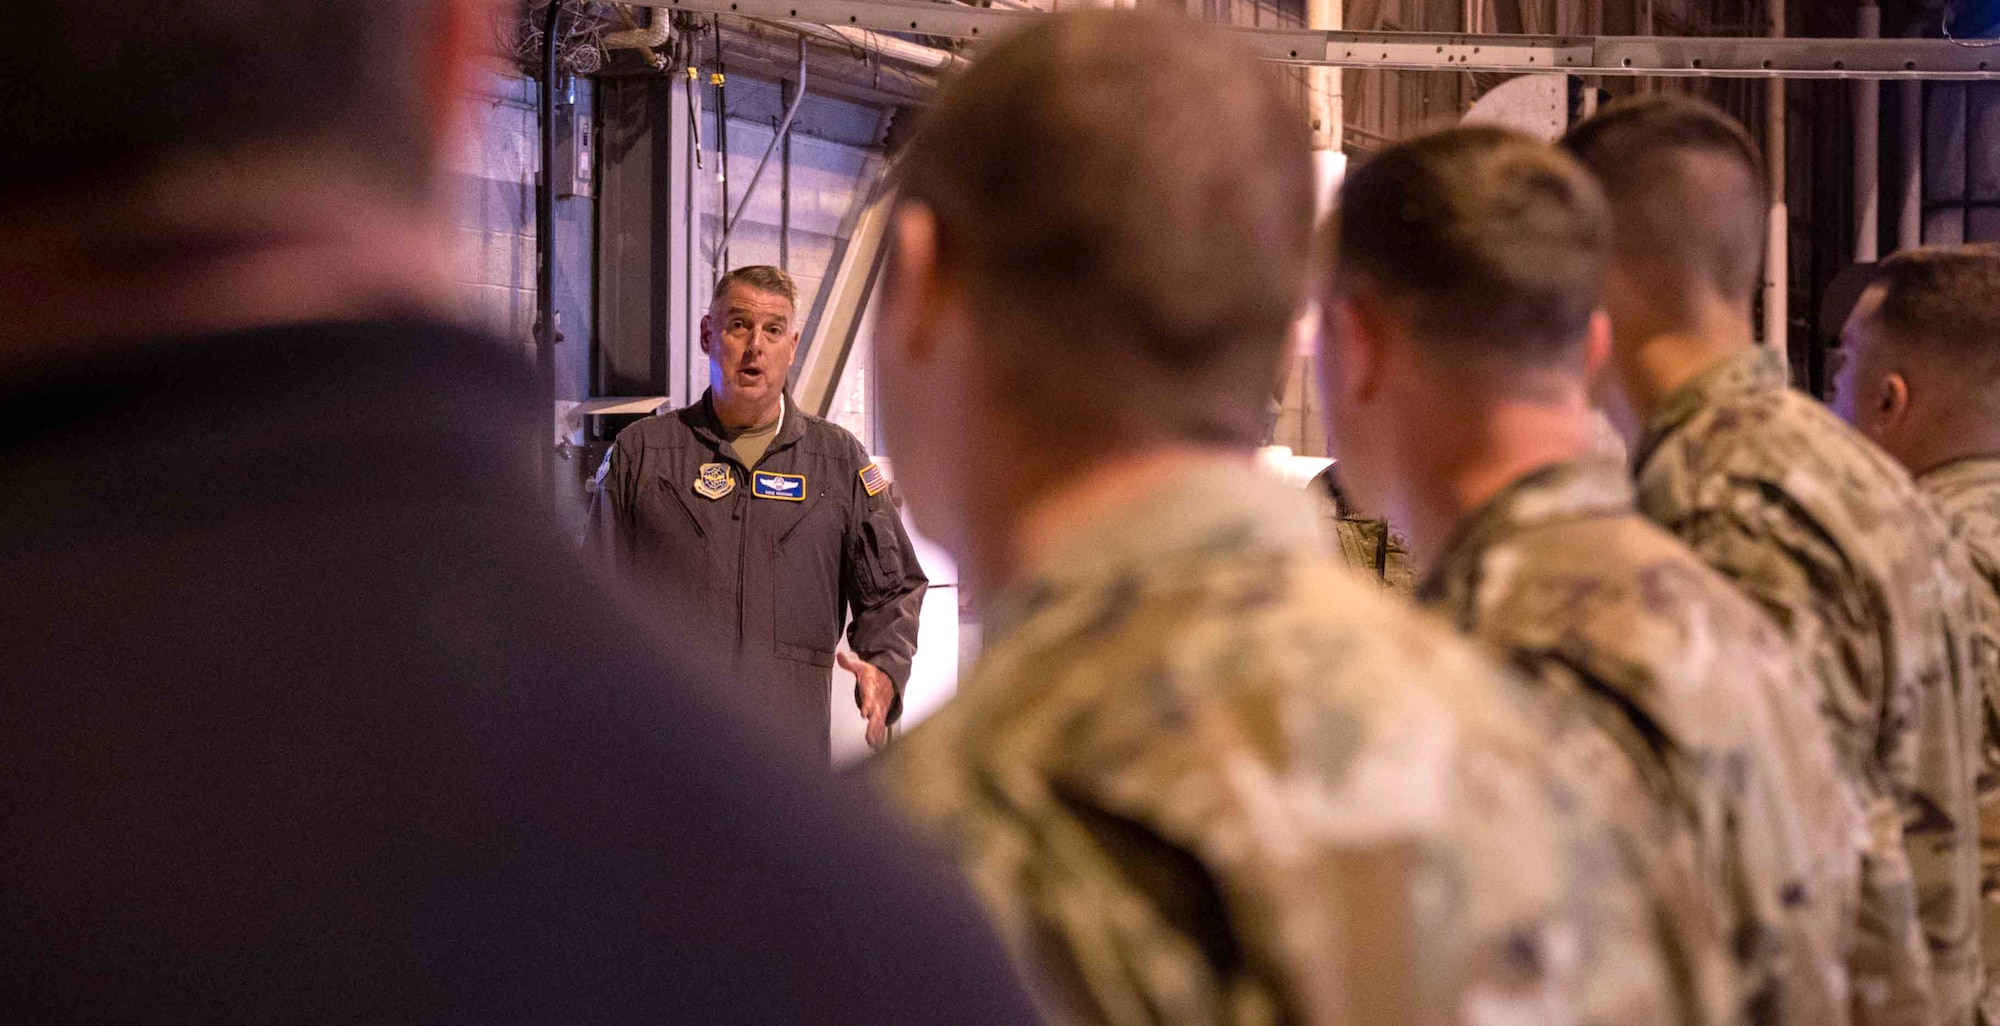 Gen. Mike Minihan, Air Mobility Command commander, speaks to Airmen at the C-5 Isochronal Dock at Dover Air Force Base, Delaware, May 5, 2022. During his visit, Minihan was briefed on Iso-dock operations and a new innovative workflow to expedite aircraft maintenance. (U.S. Air Force photo by Senior Airman Faith Schaefer)